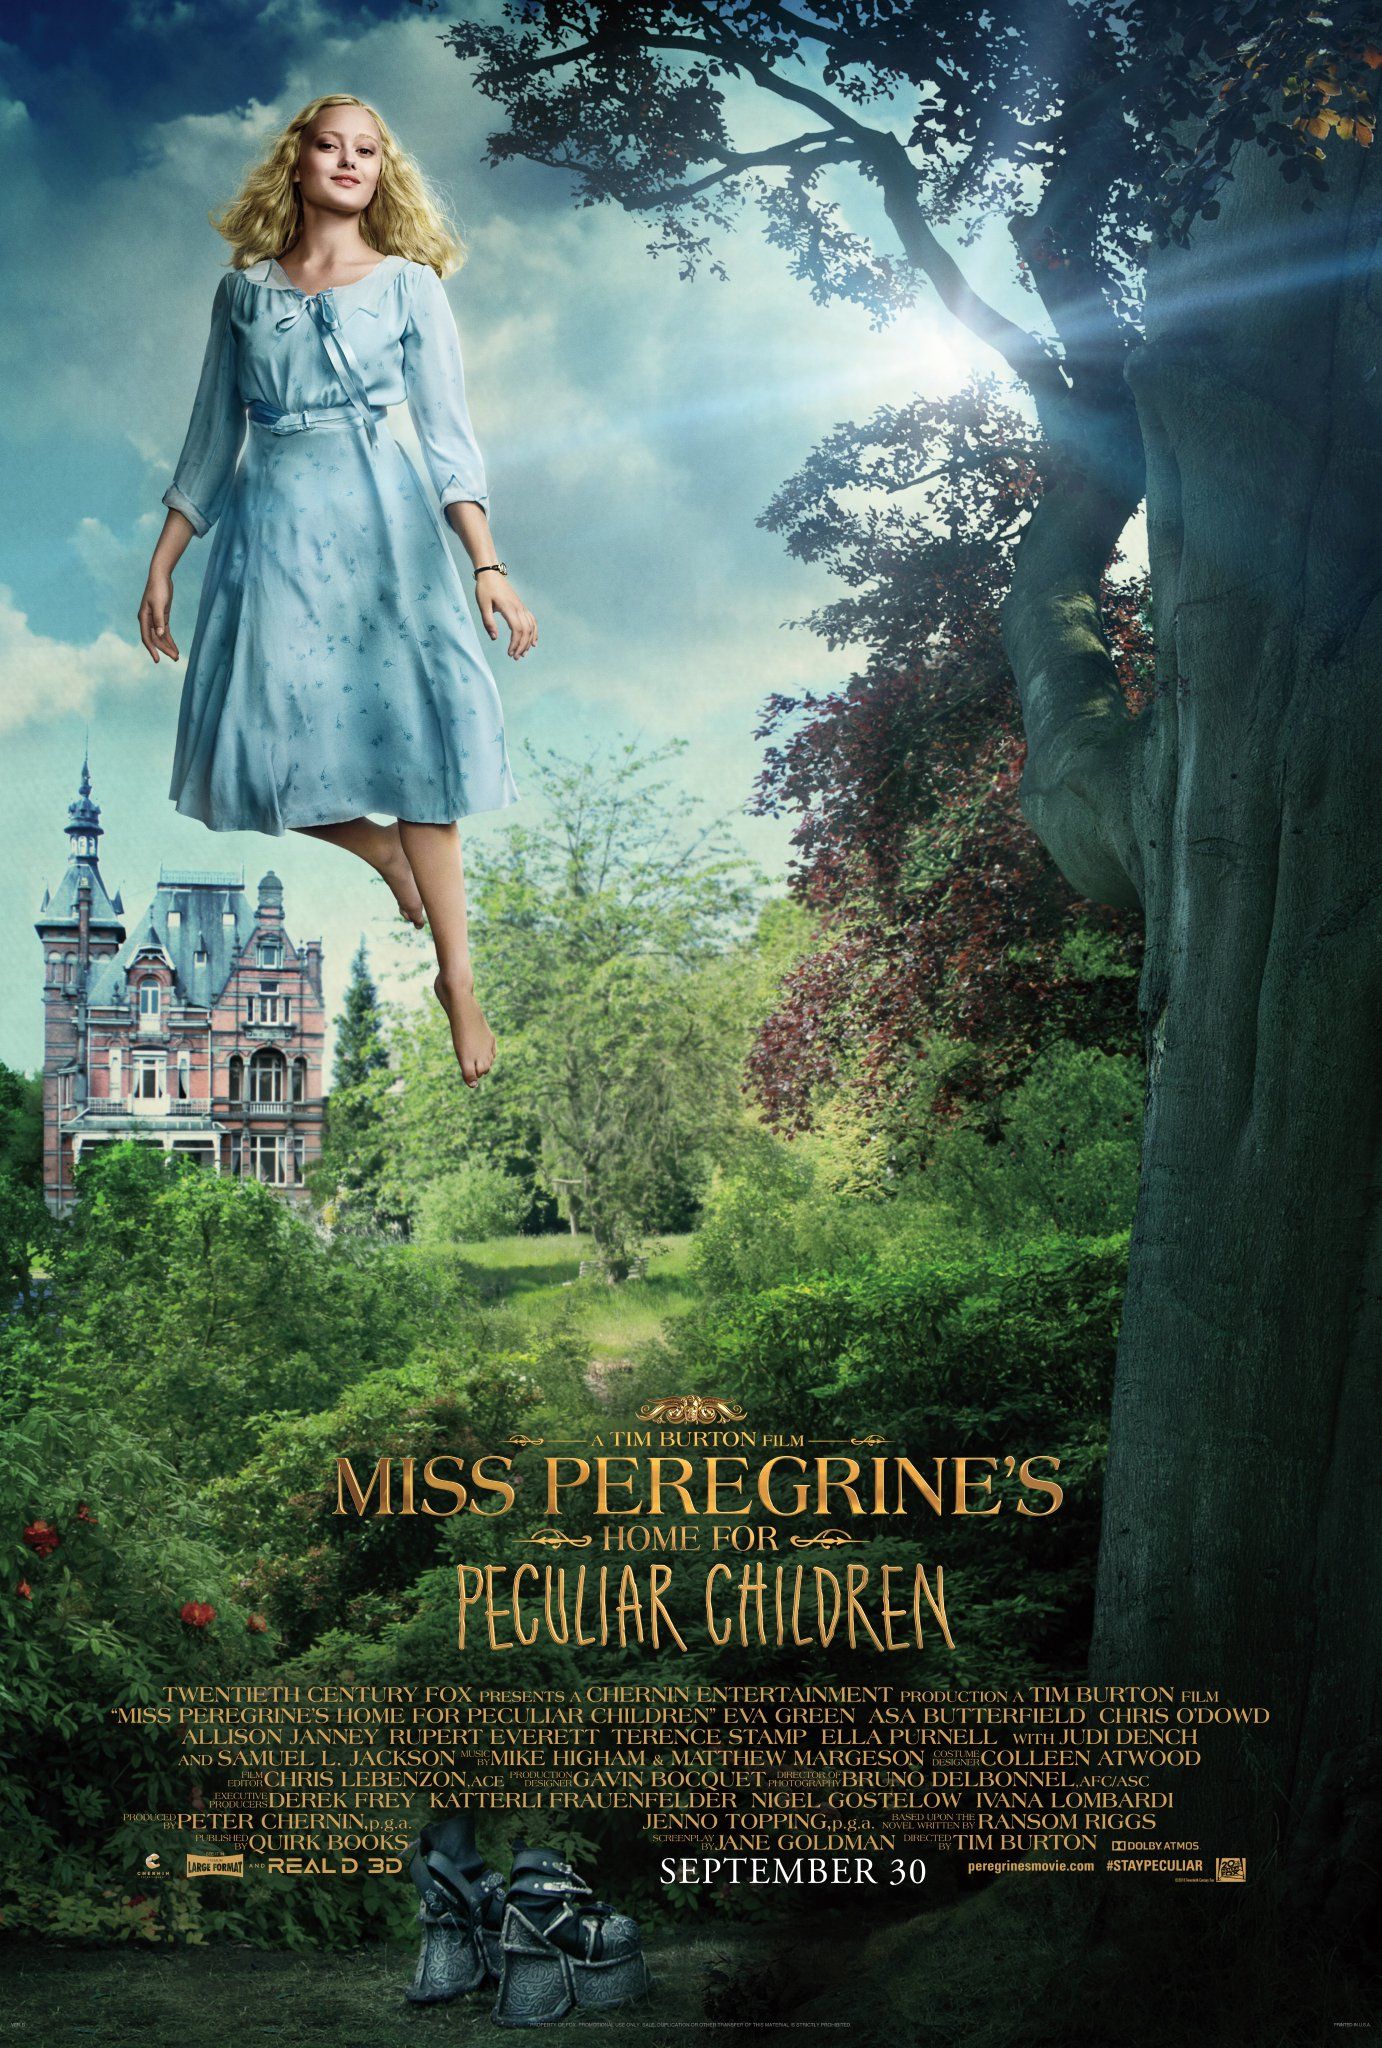 miss-peregrines-home-for-peculiar-children-poster-emma.jpg